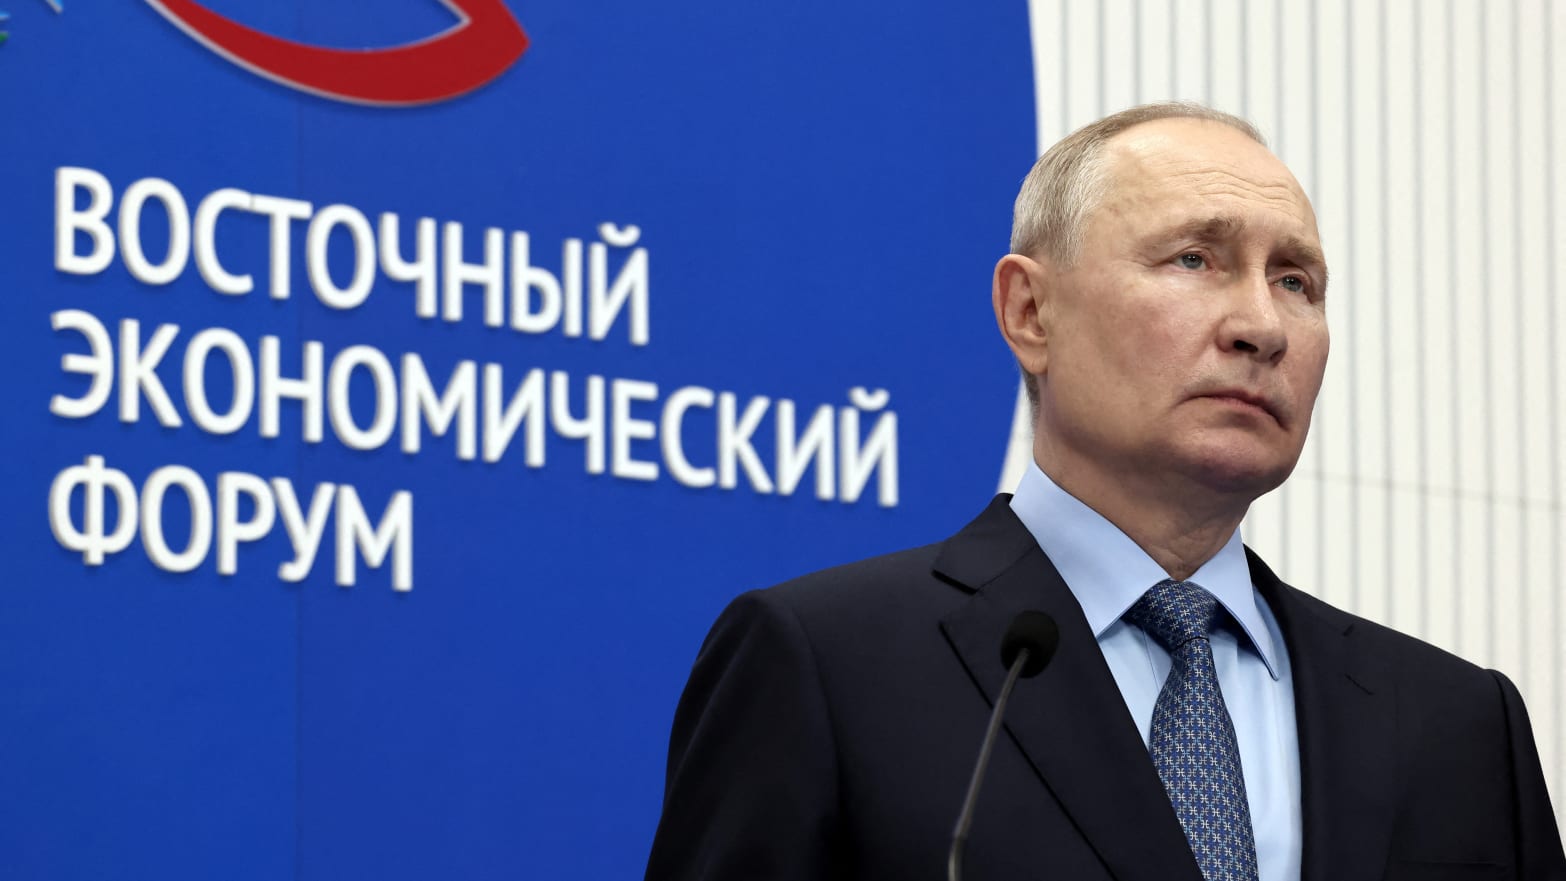 Putin Lashes Out at Anatoly Chubais for First Time Since He Quit Russia